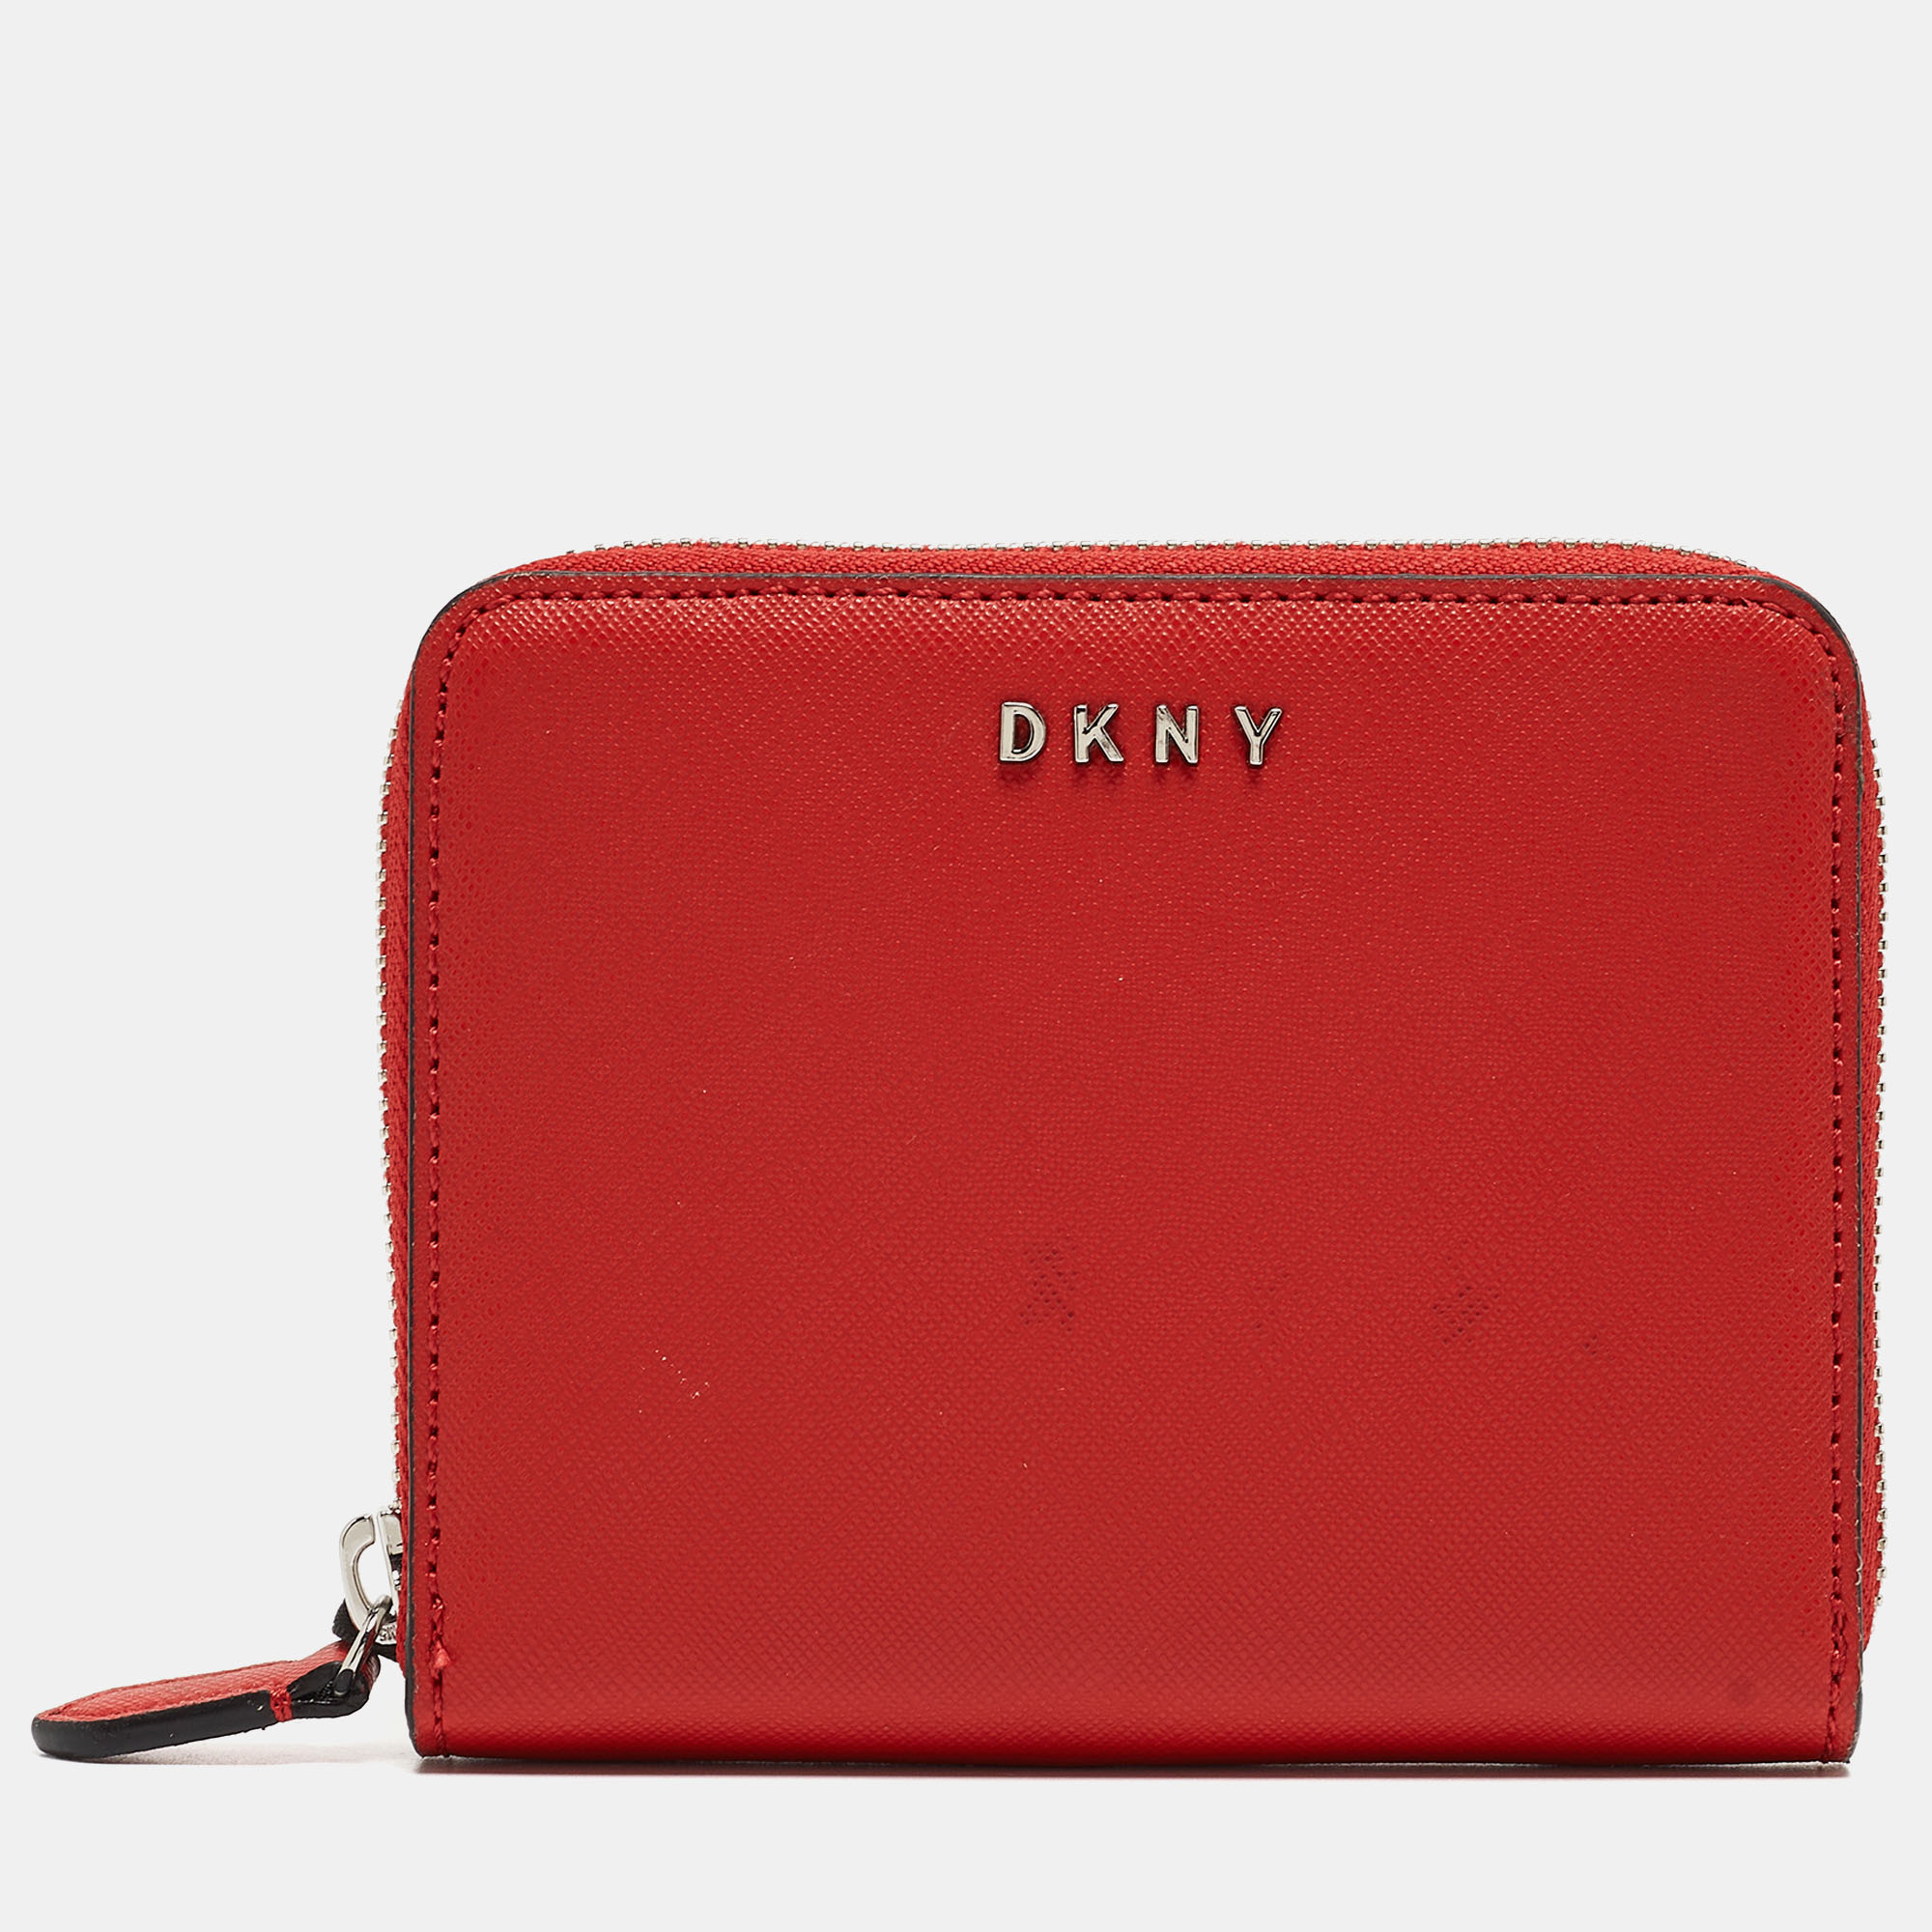 

DKNY Red Leather Vela Zip Around Wallet